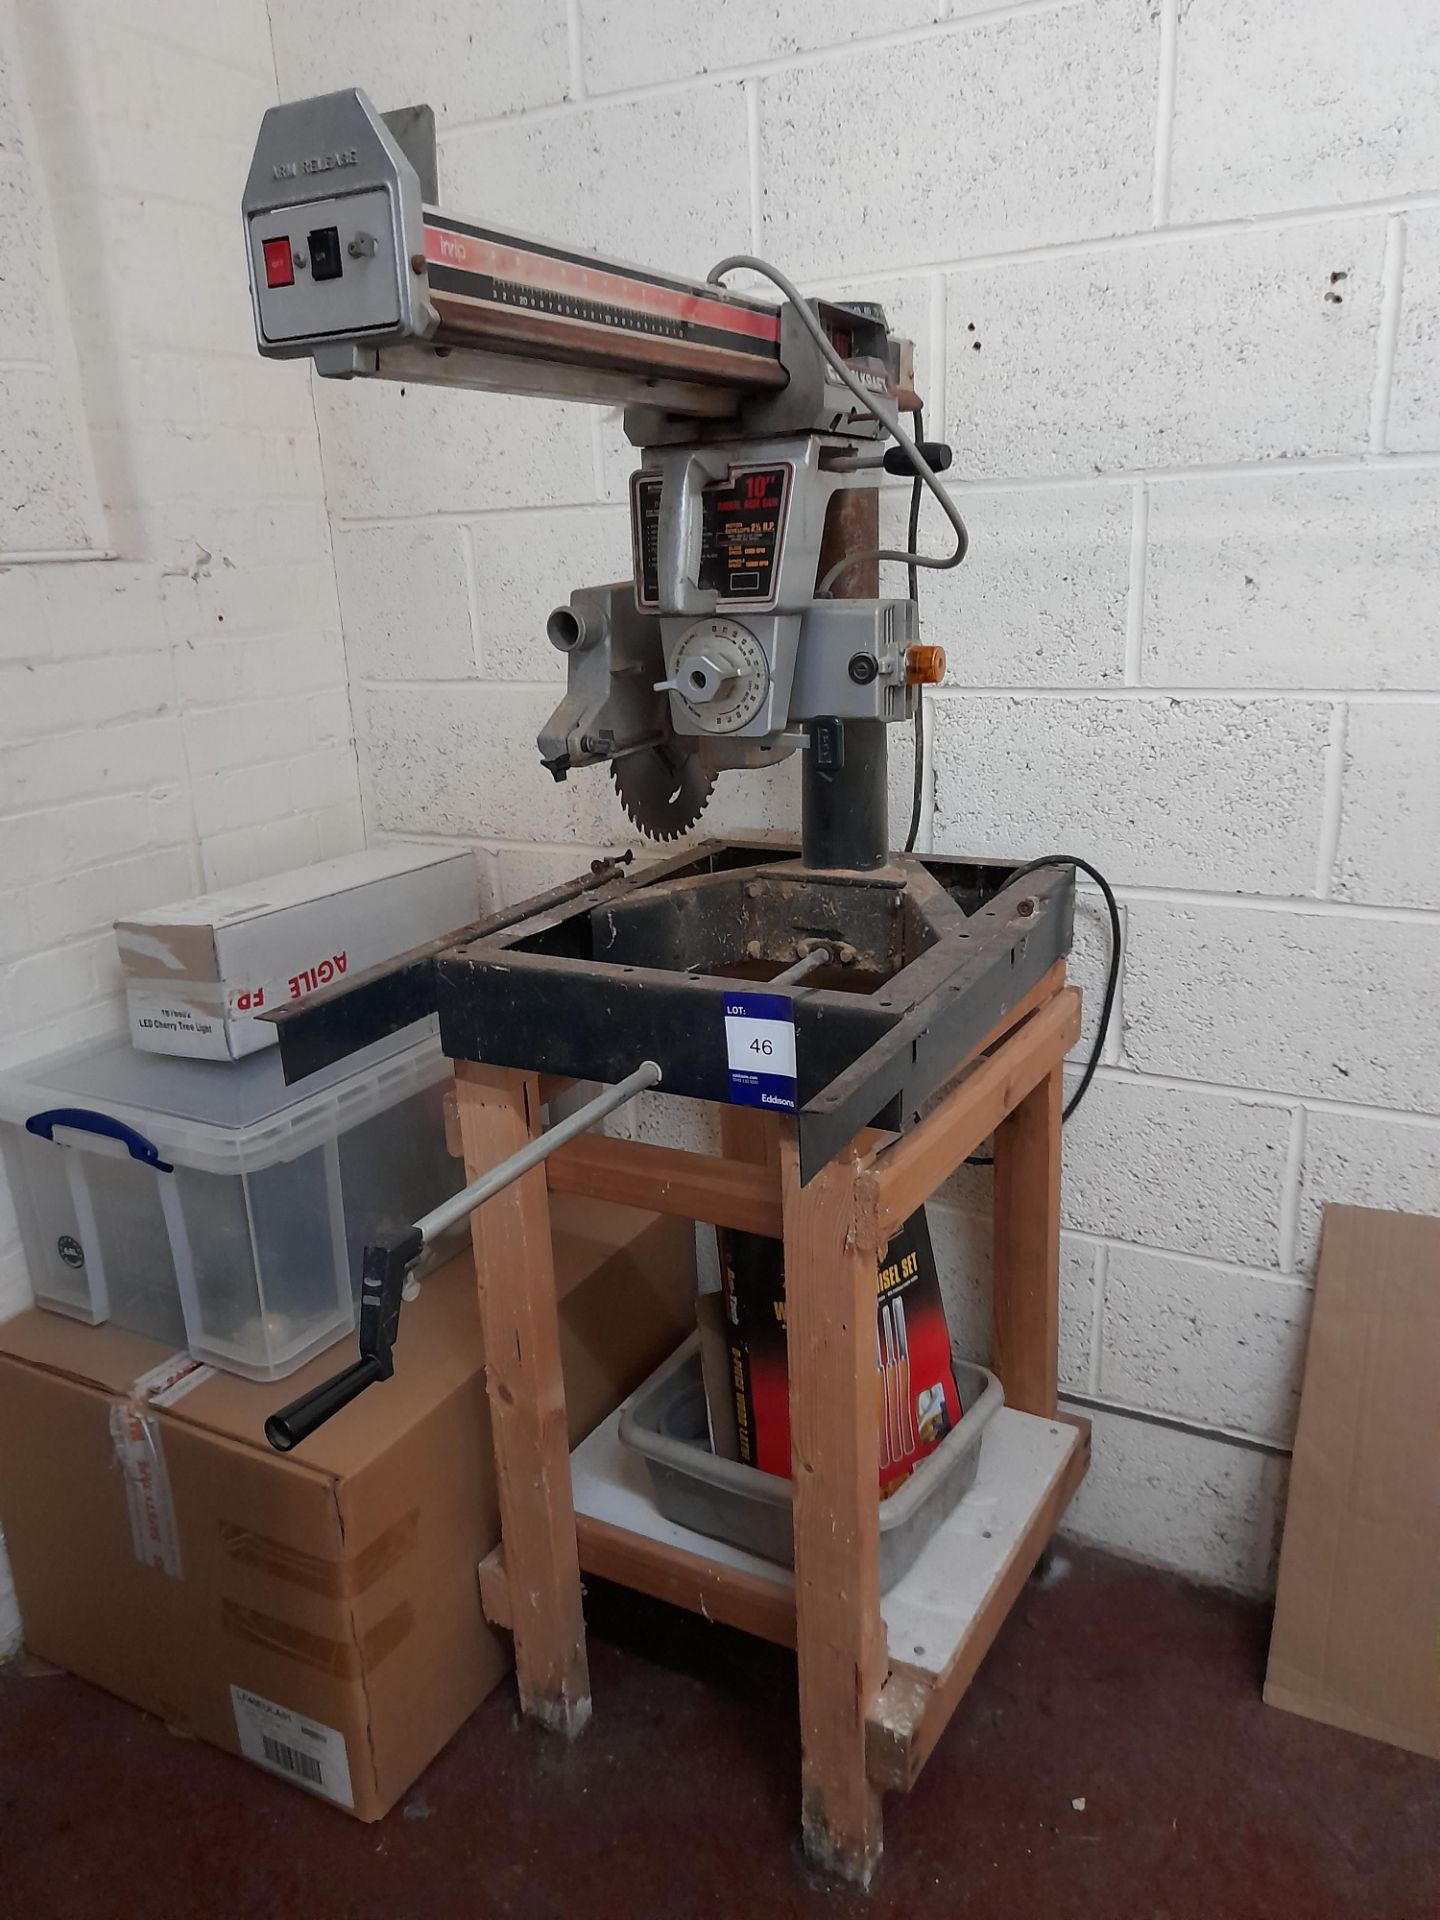 ToolKraft Model 4015 10” Radial Arm Drill, serial number 08X1718, 240v, on wooden stand - Image 2 of 6